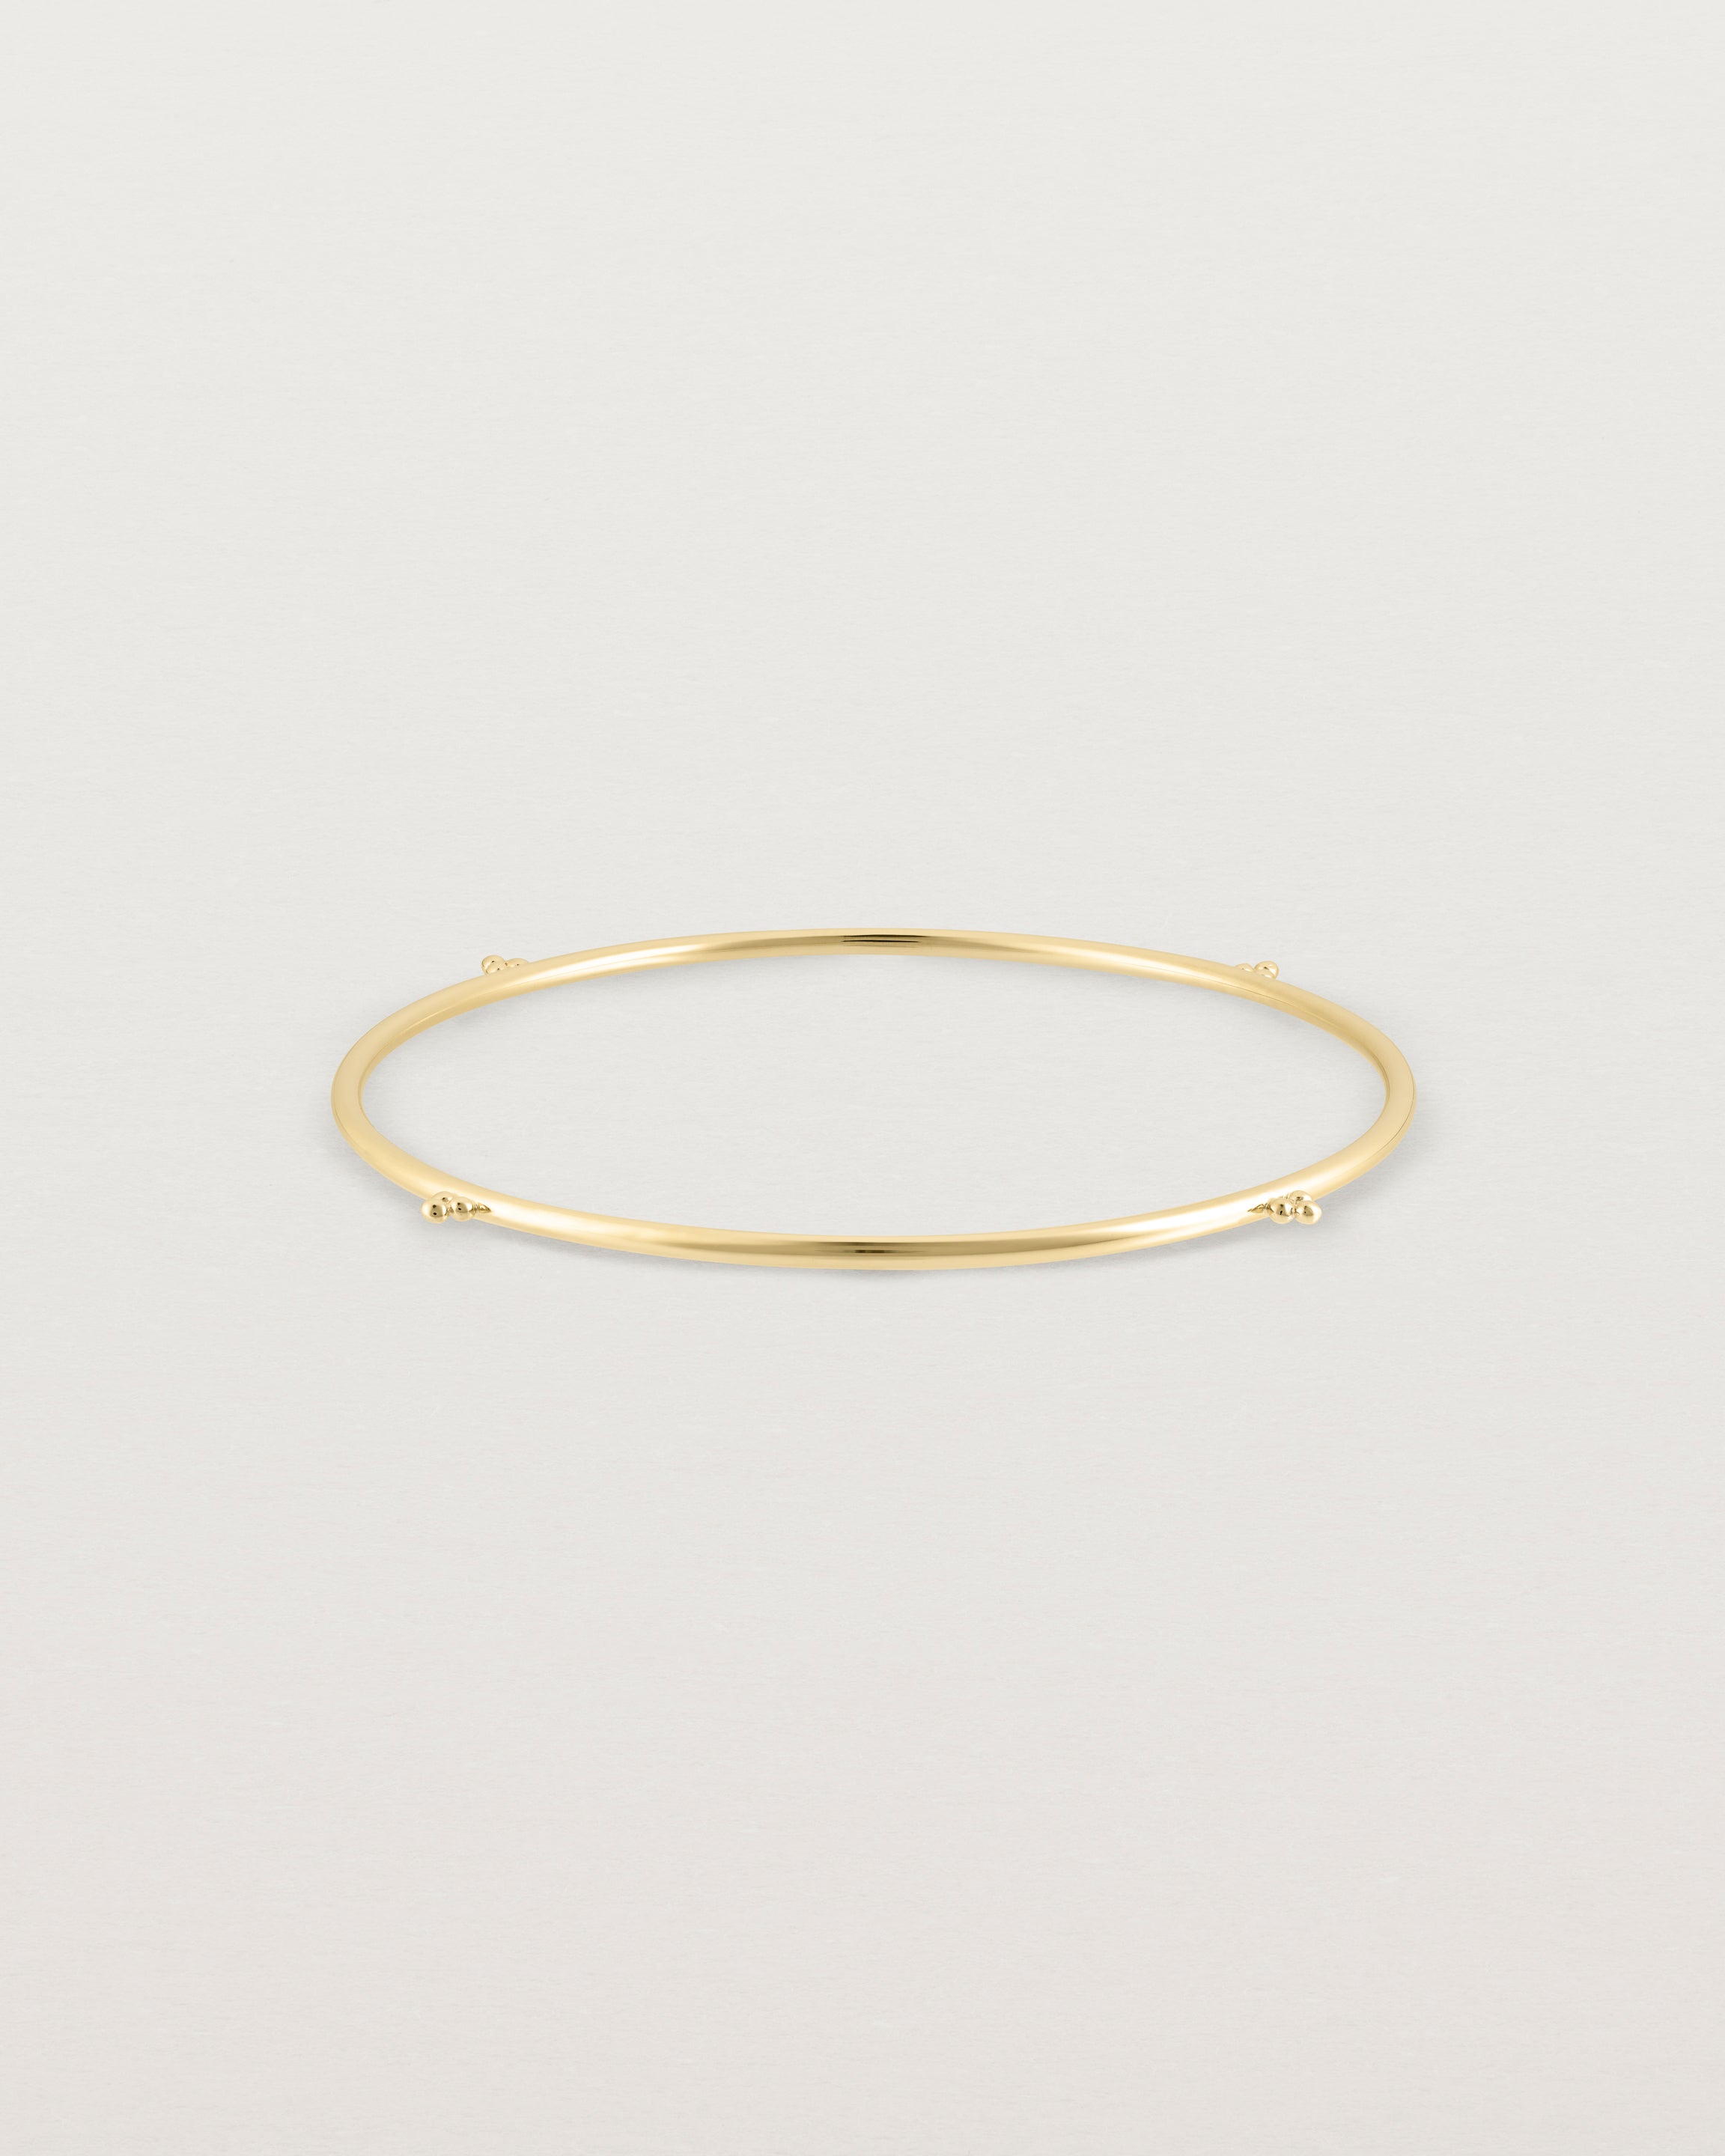 Front view of the Alya Bangle in Yellow Gold.